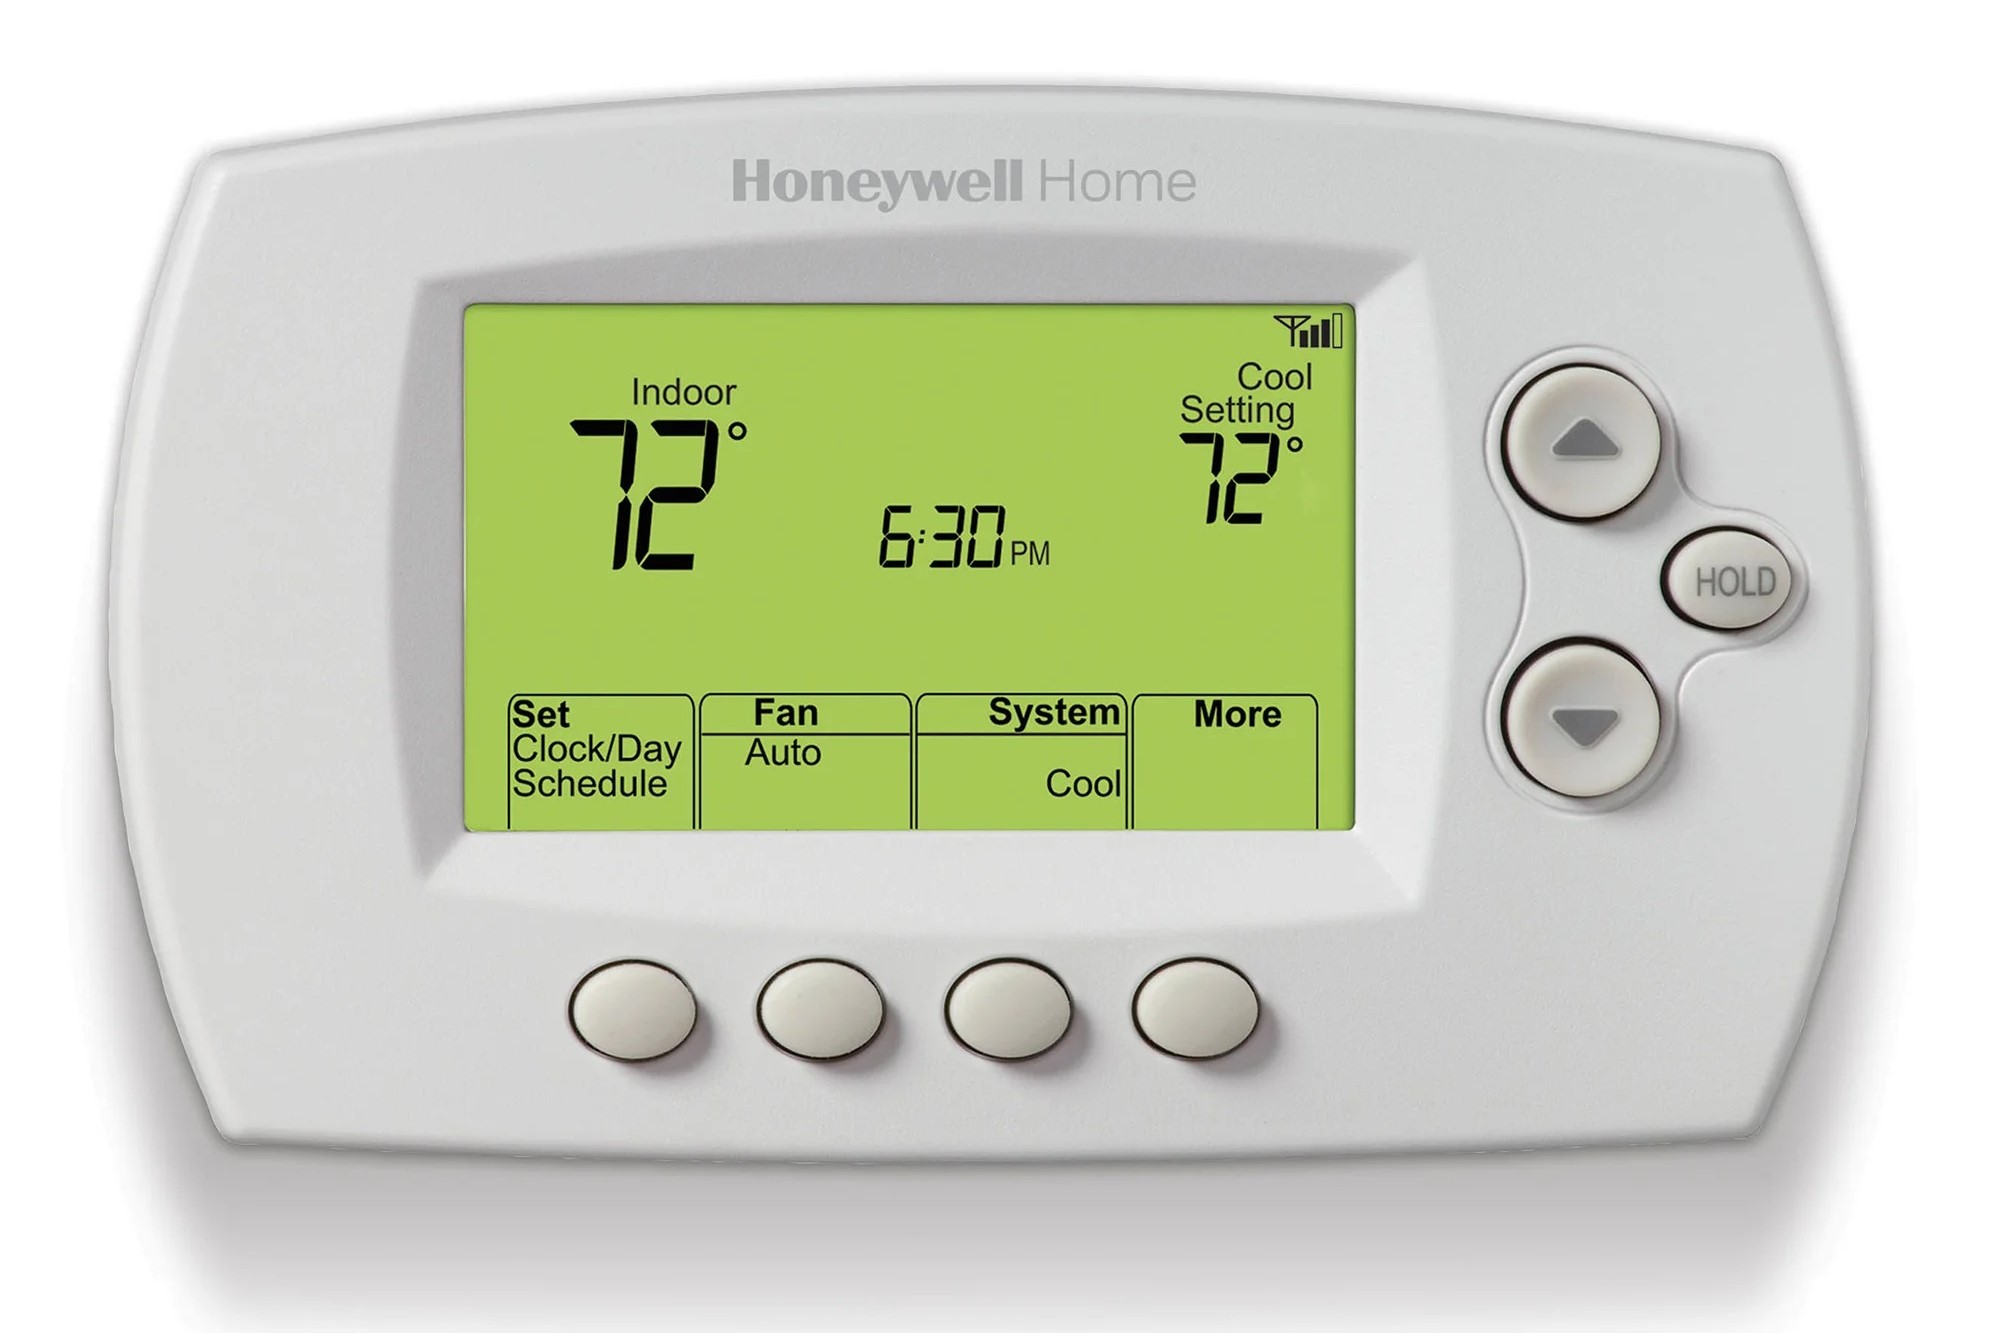 How To Install And Use The Honeywell Home Thermostat